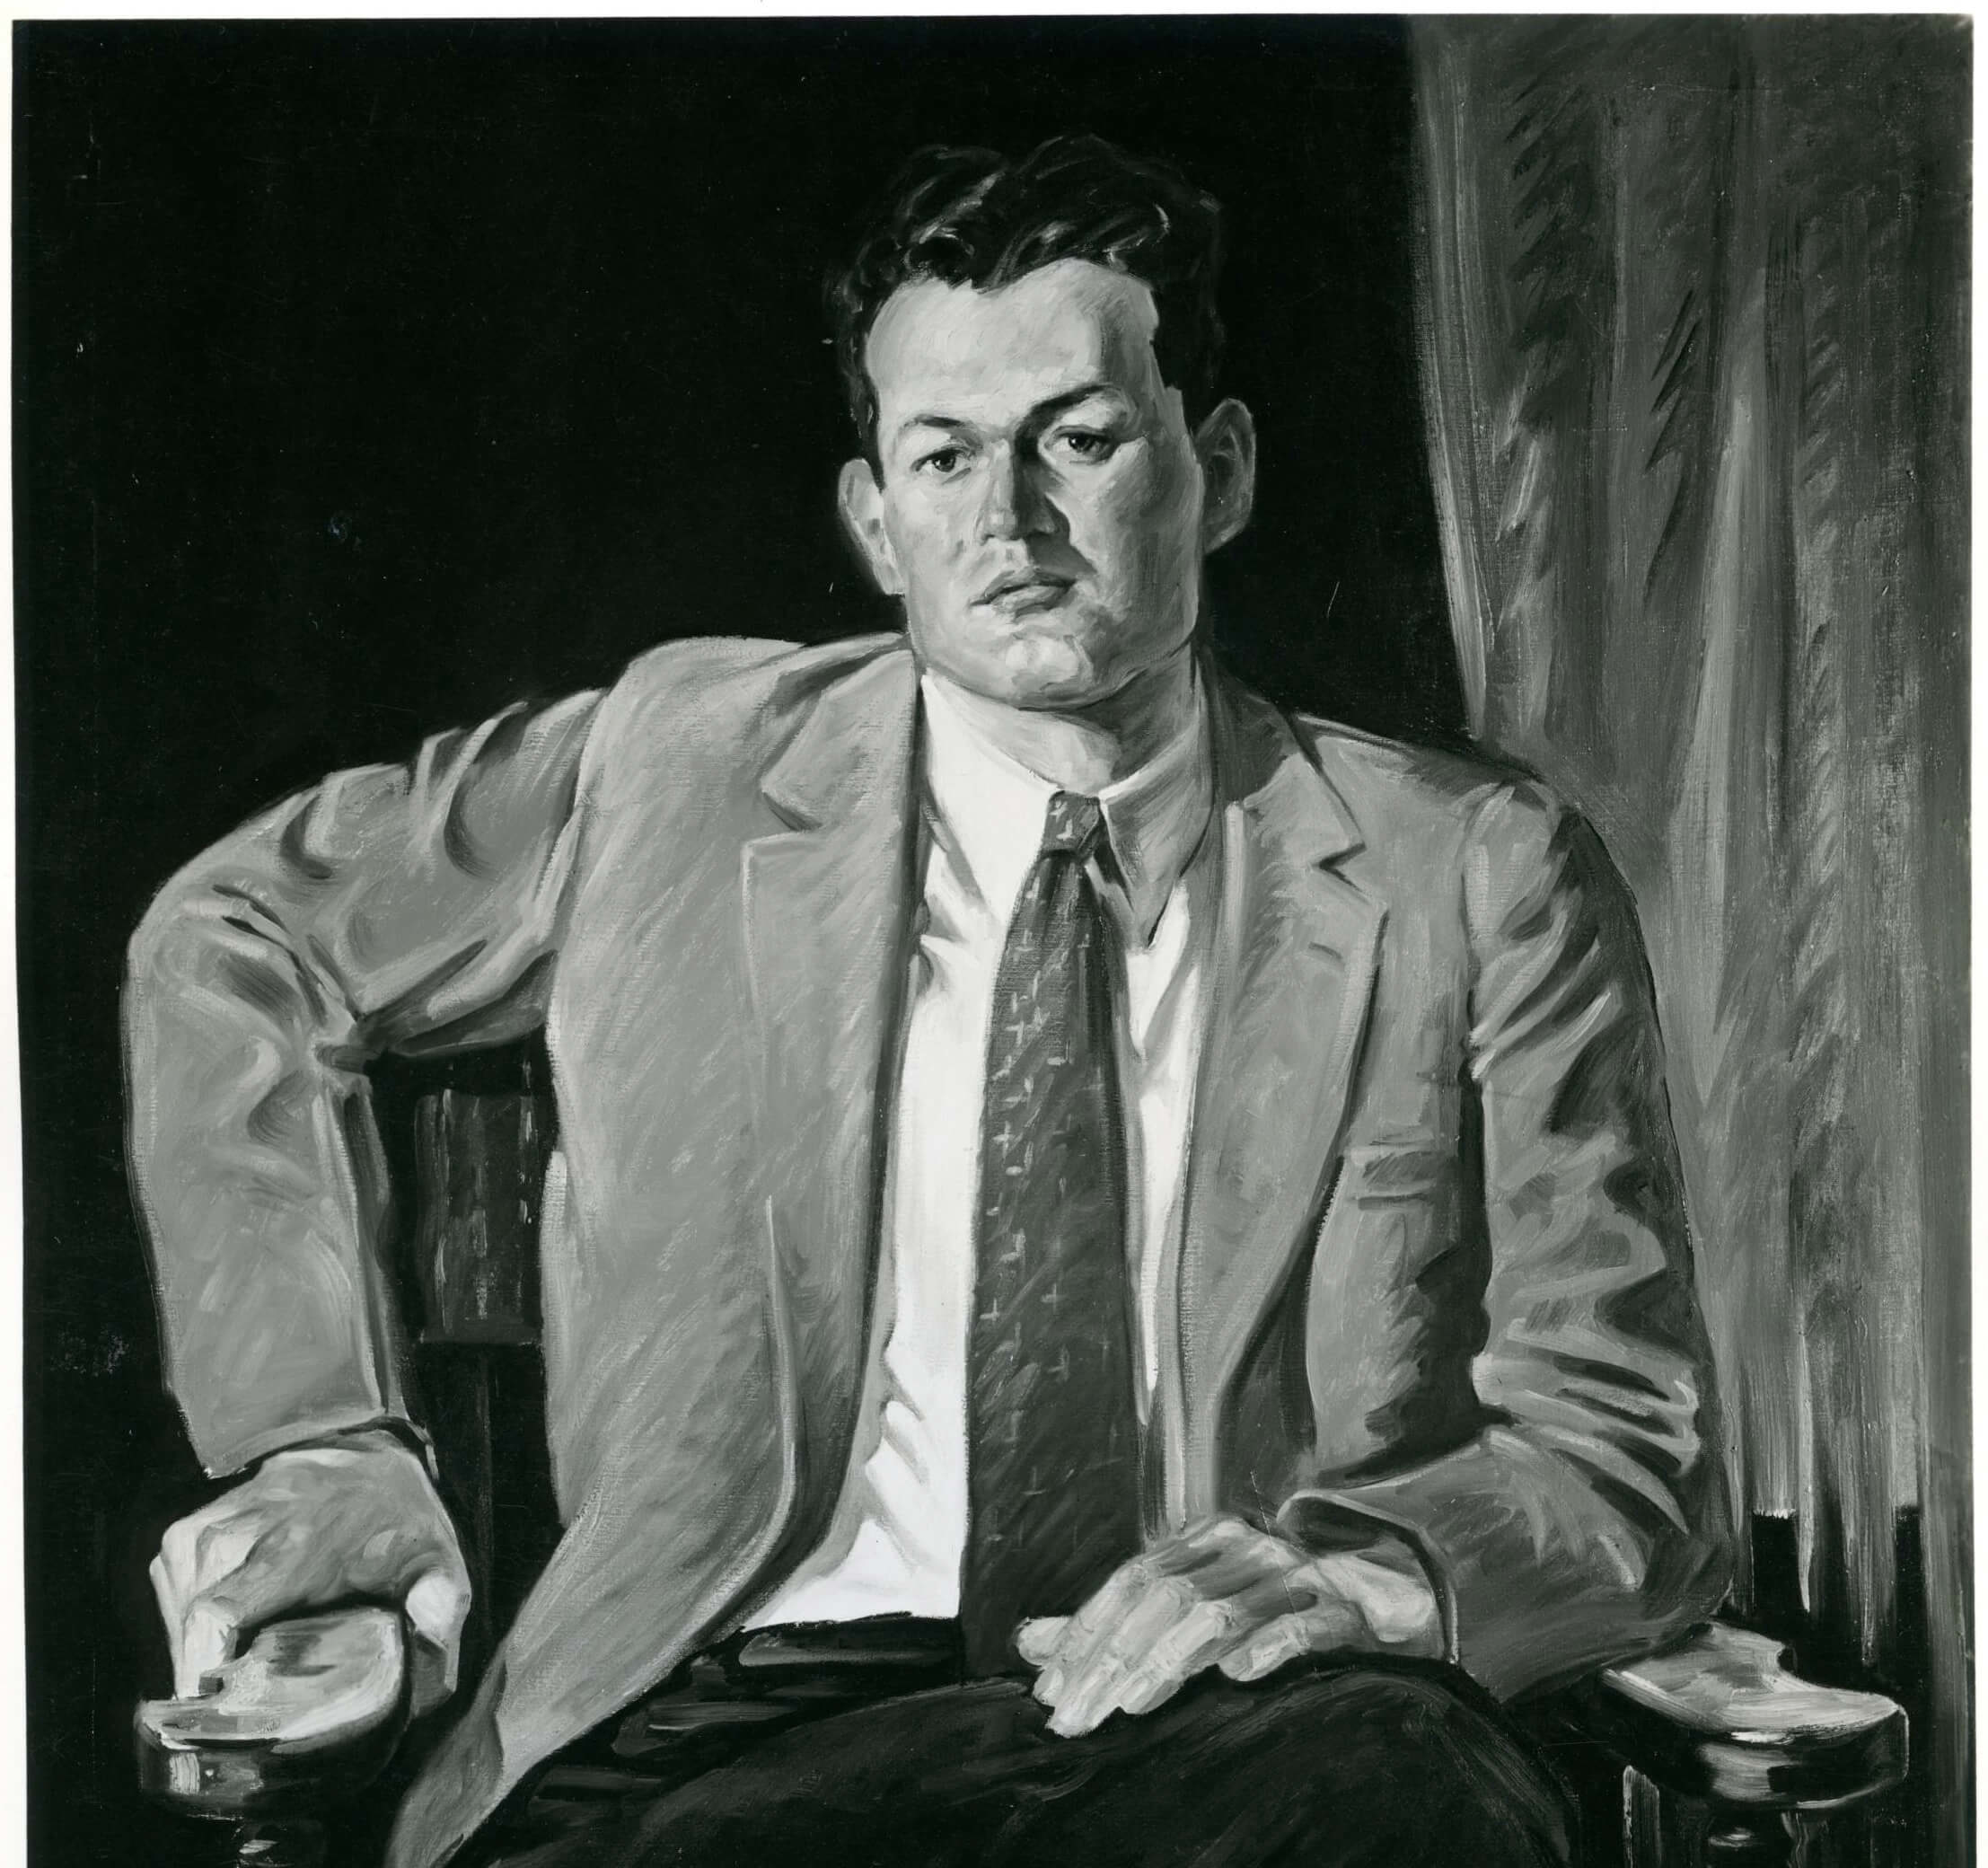 Portrait of a man with his jacket open, wearing a tie, and with one arm bent at a 90 degree angle to the side